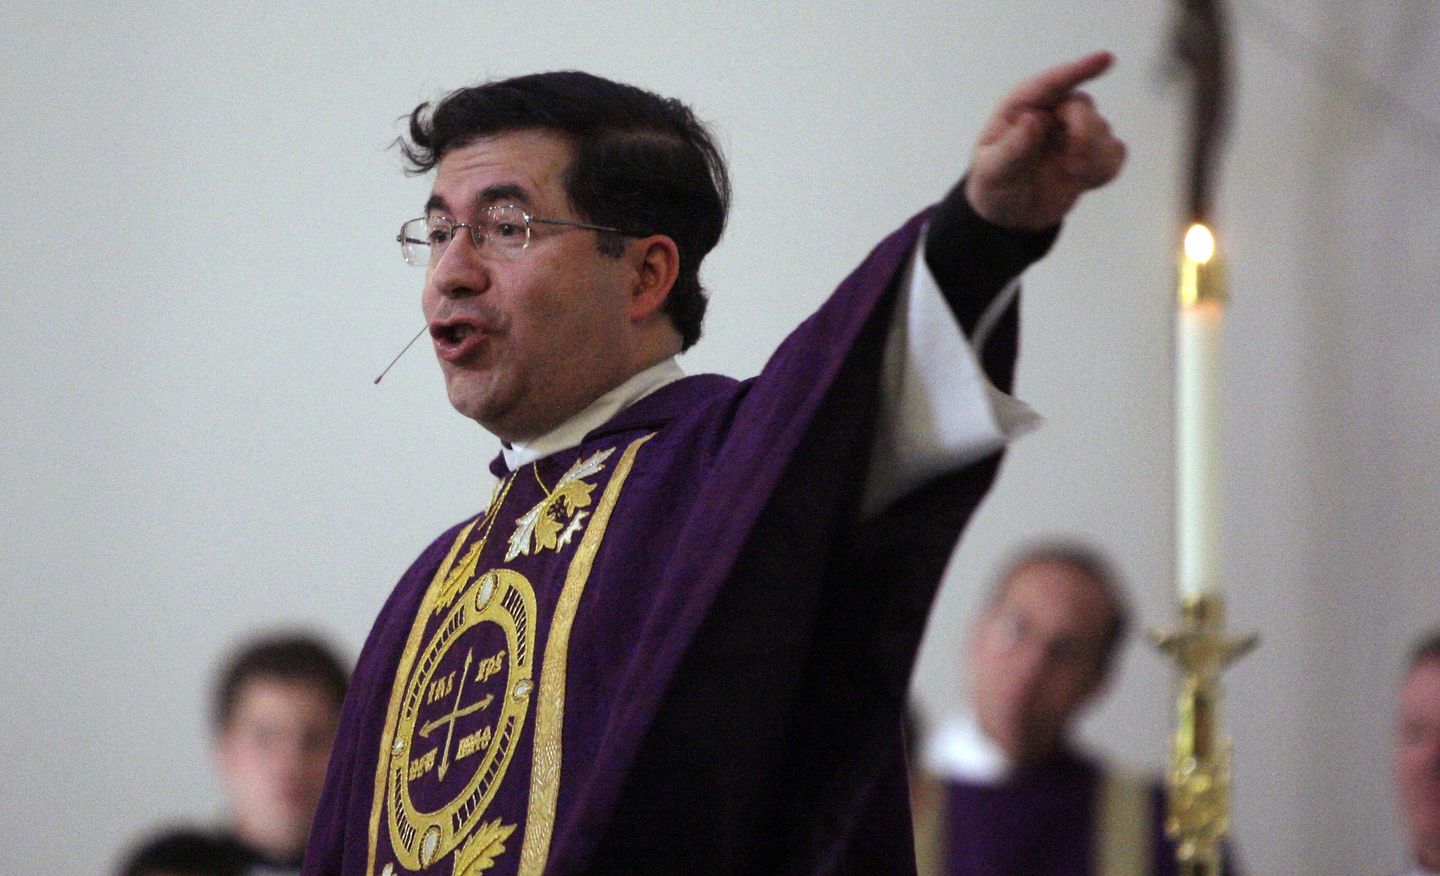 Frank Pavone, defrocked pro-life Catholic priest, still has no reason for dismissal, aide says